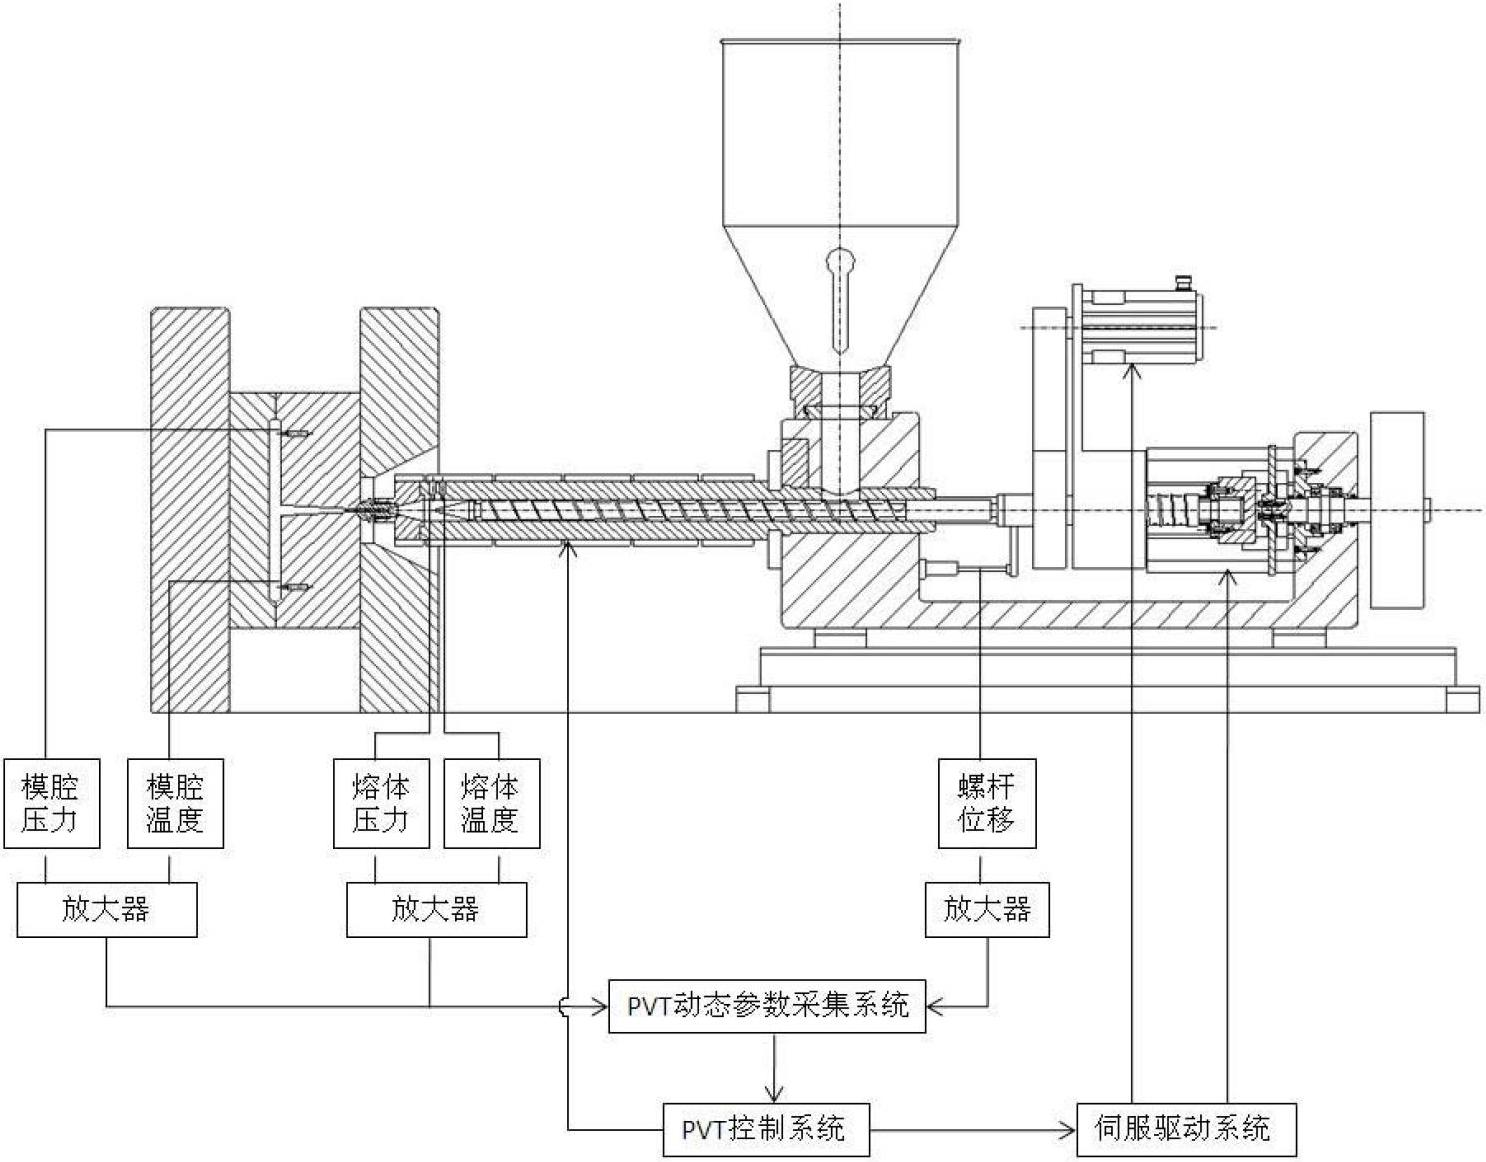 Fully-electric ultra-high speed injection molding PVT (Pressure Volume Temperature) online measurement and control method